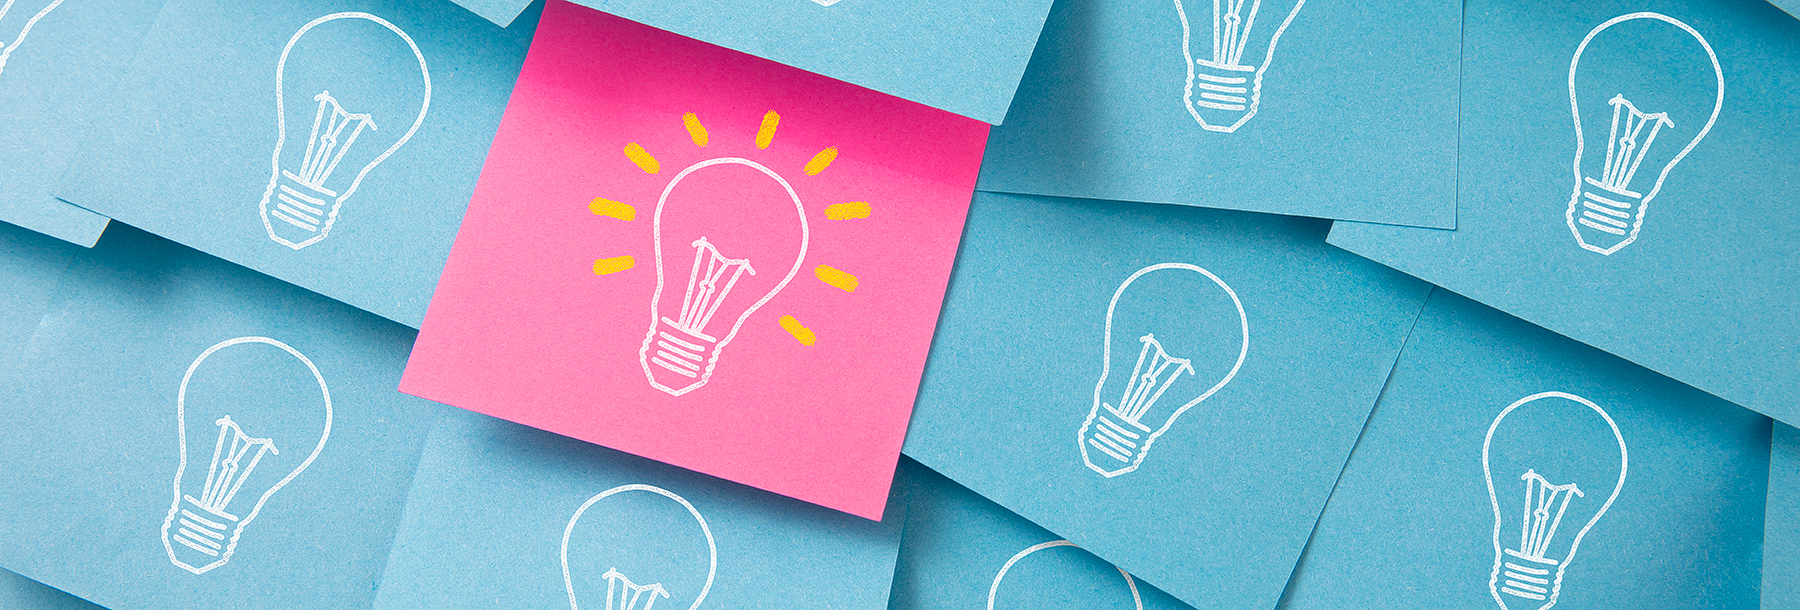 Section Image: post-it notes with light bulbs 